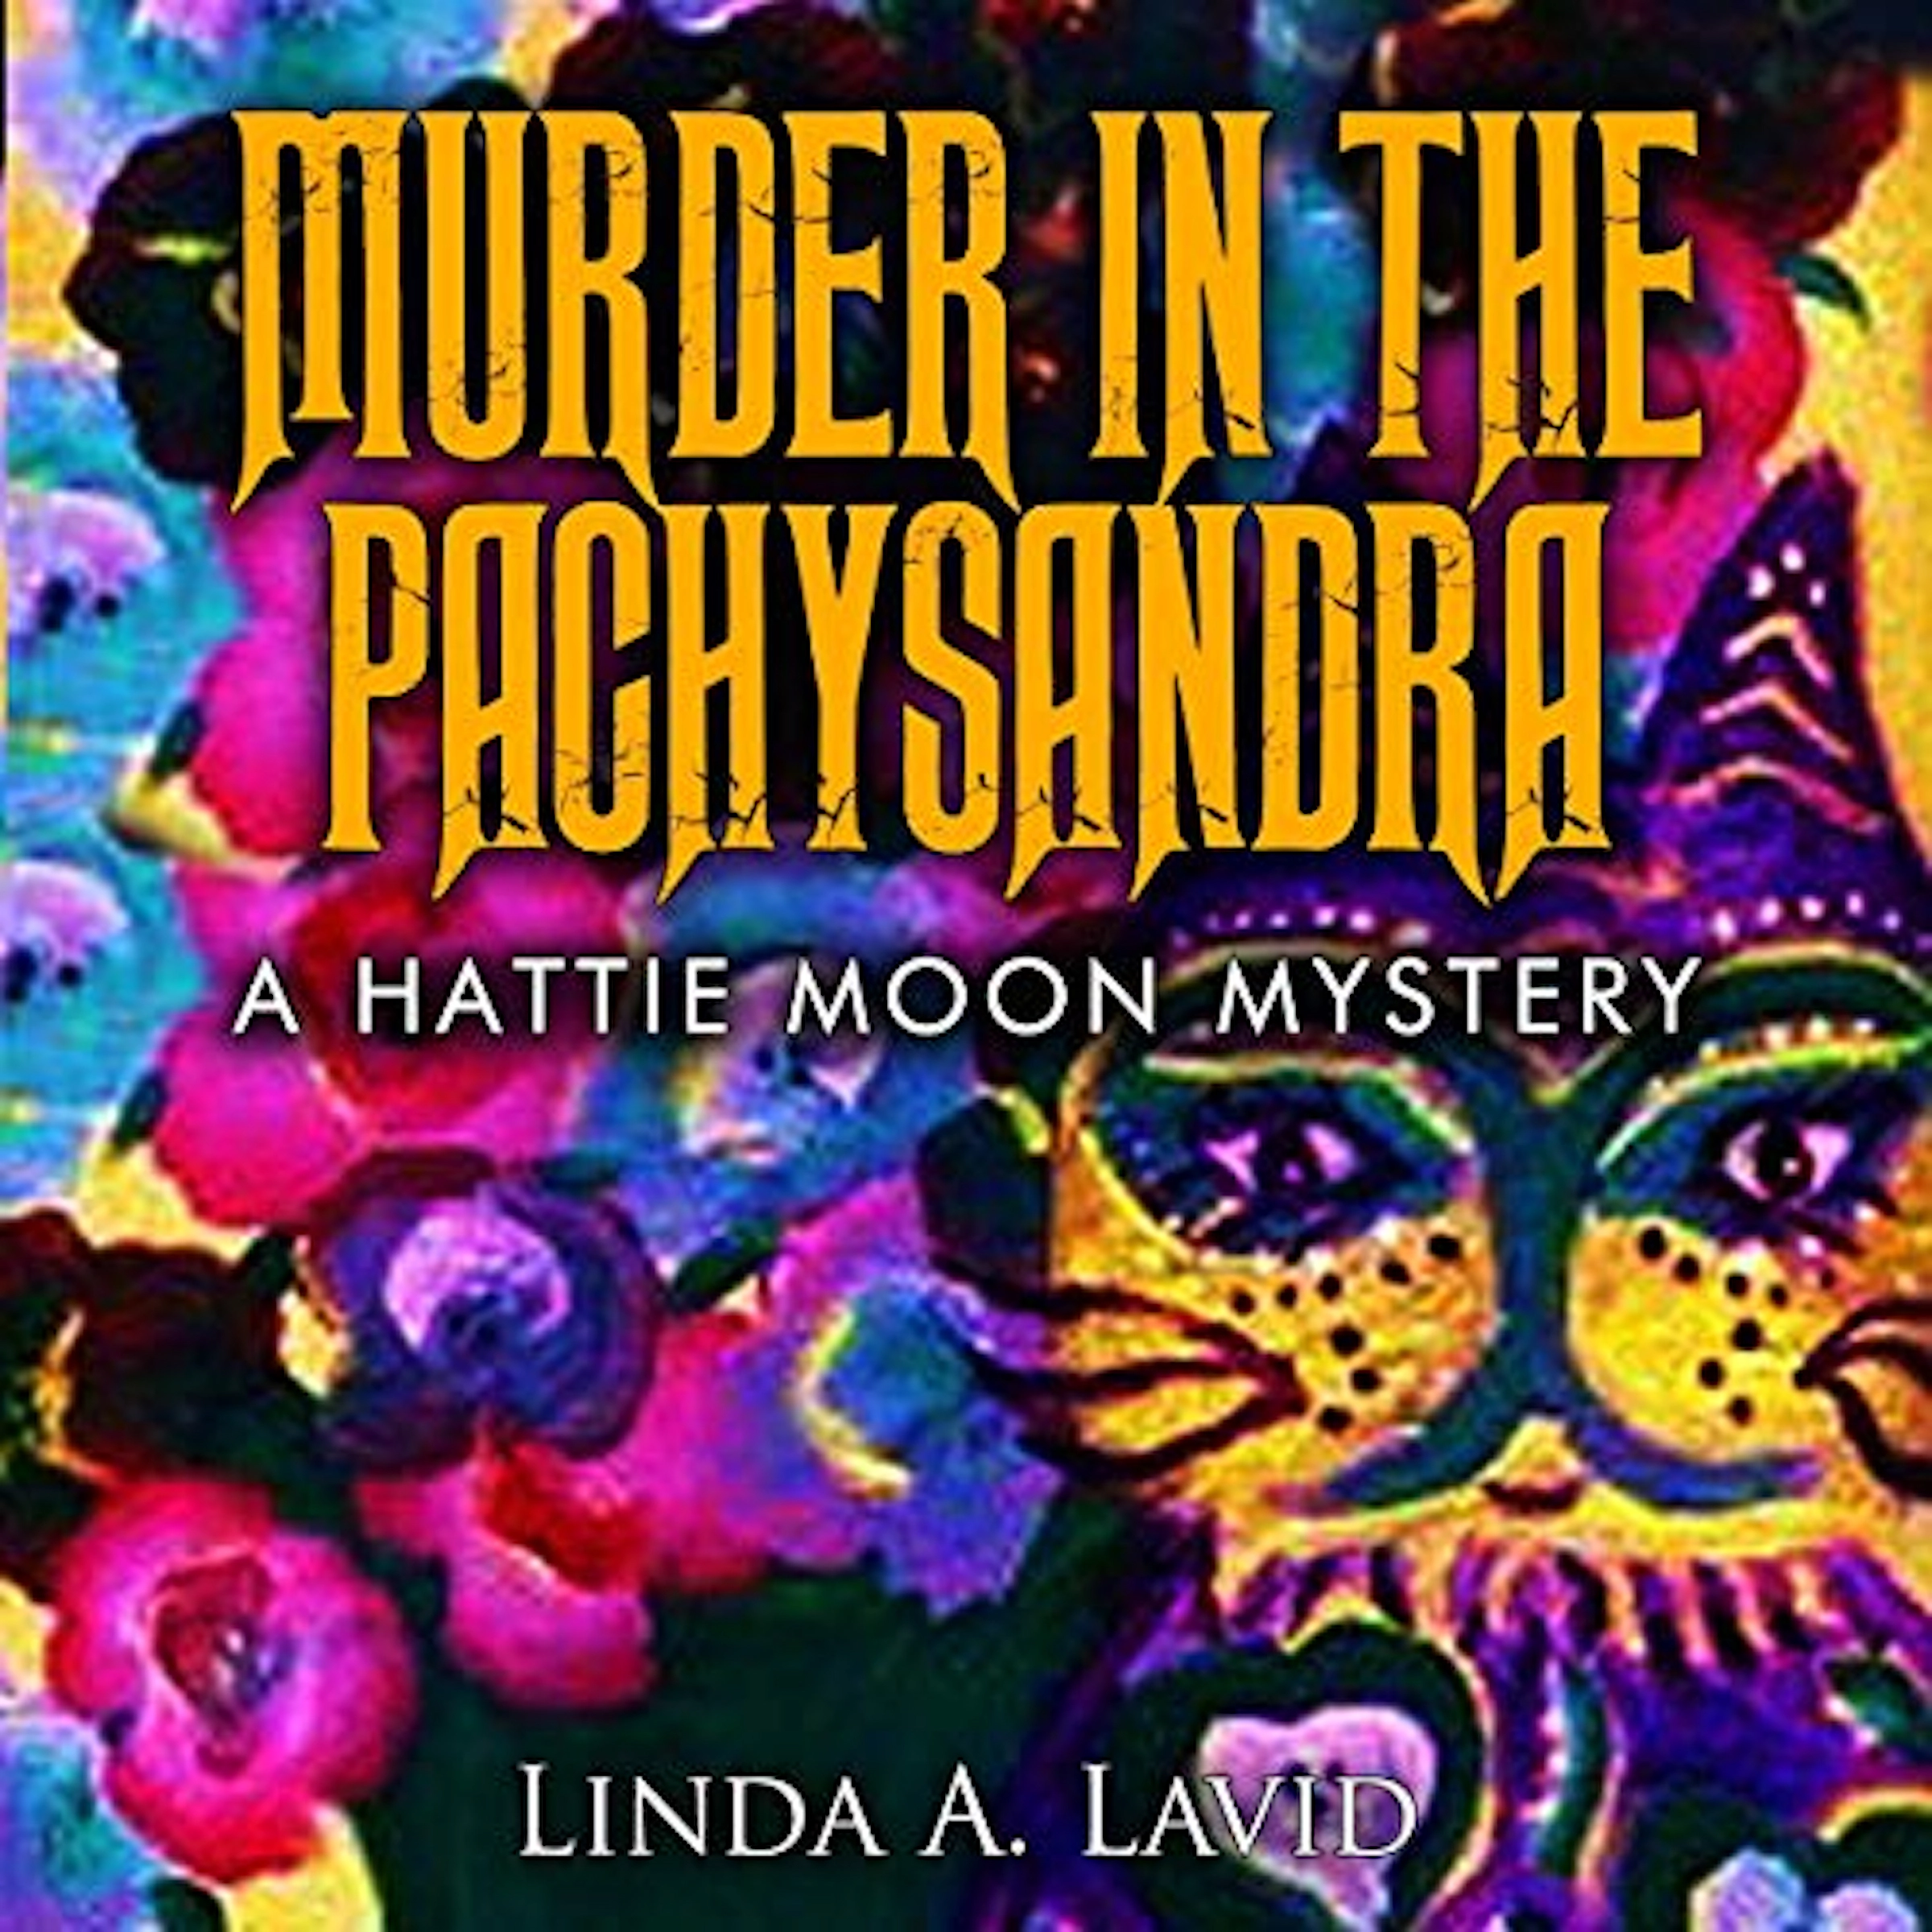 Murder in the Pachysandra by Linda A Lavid Audiobook